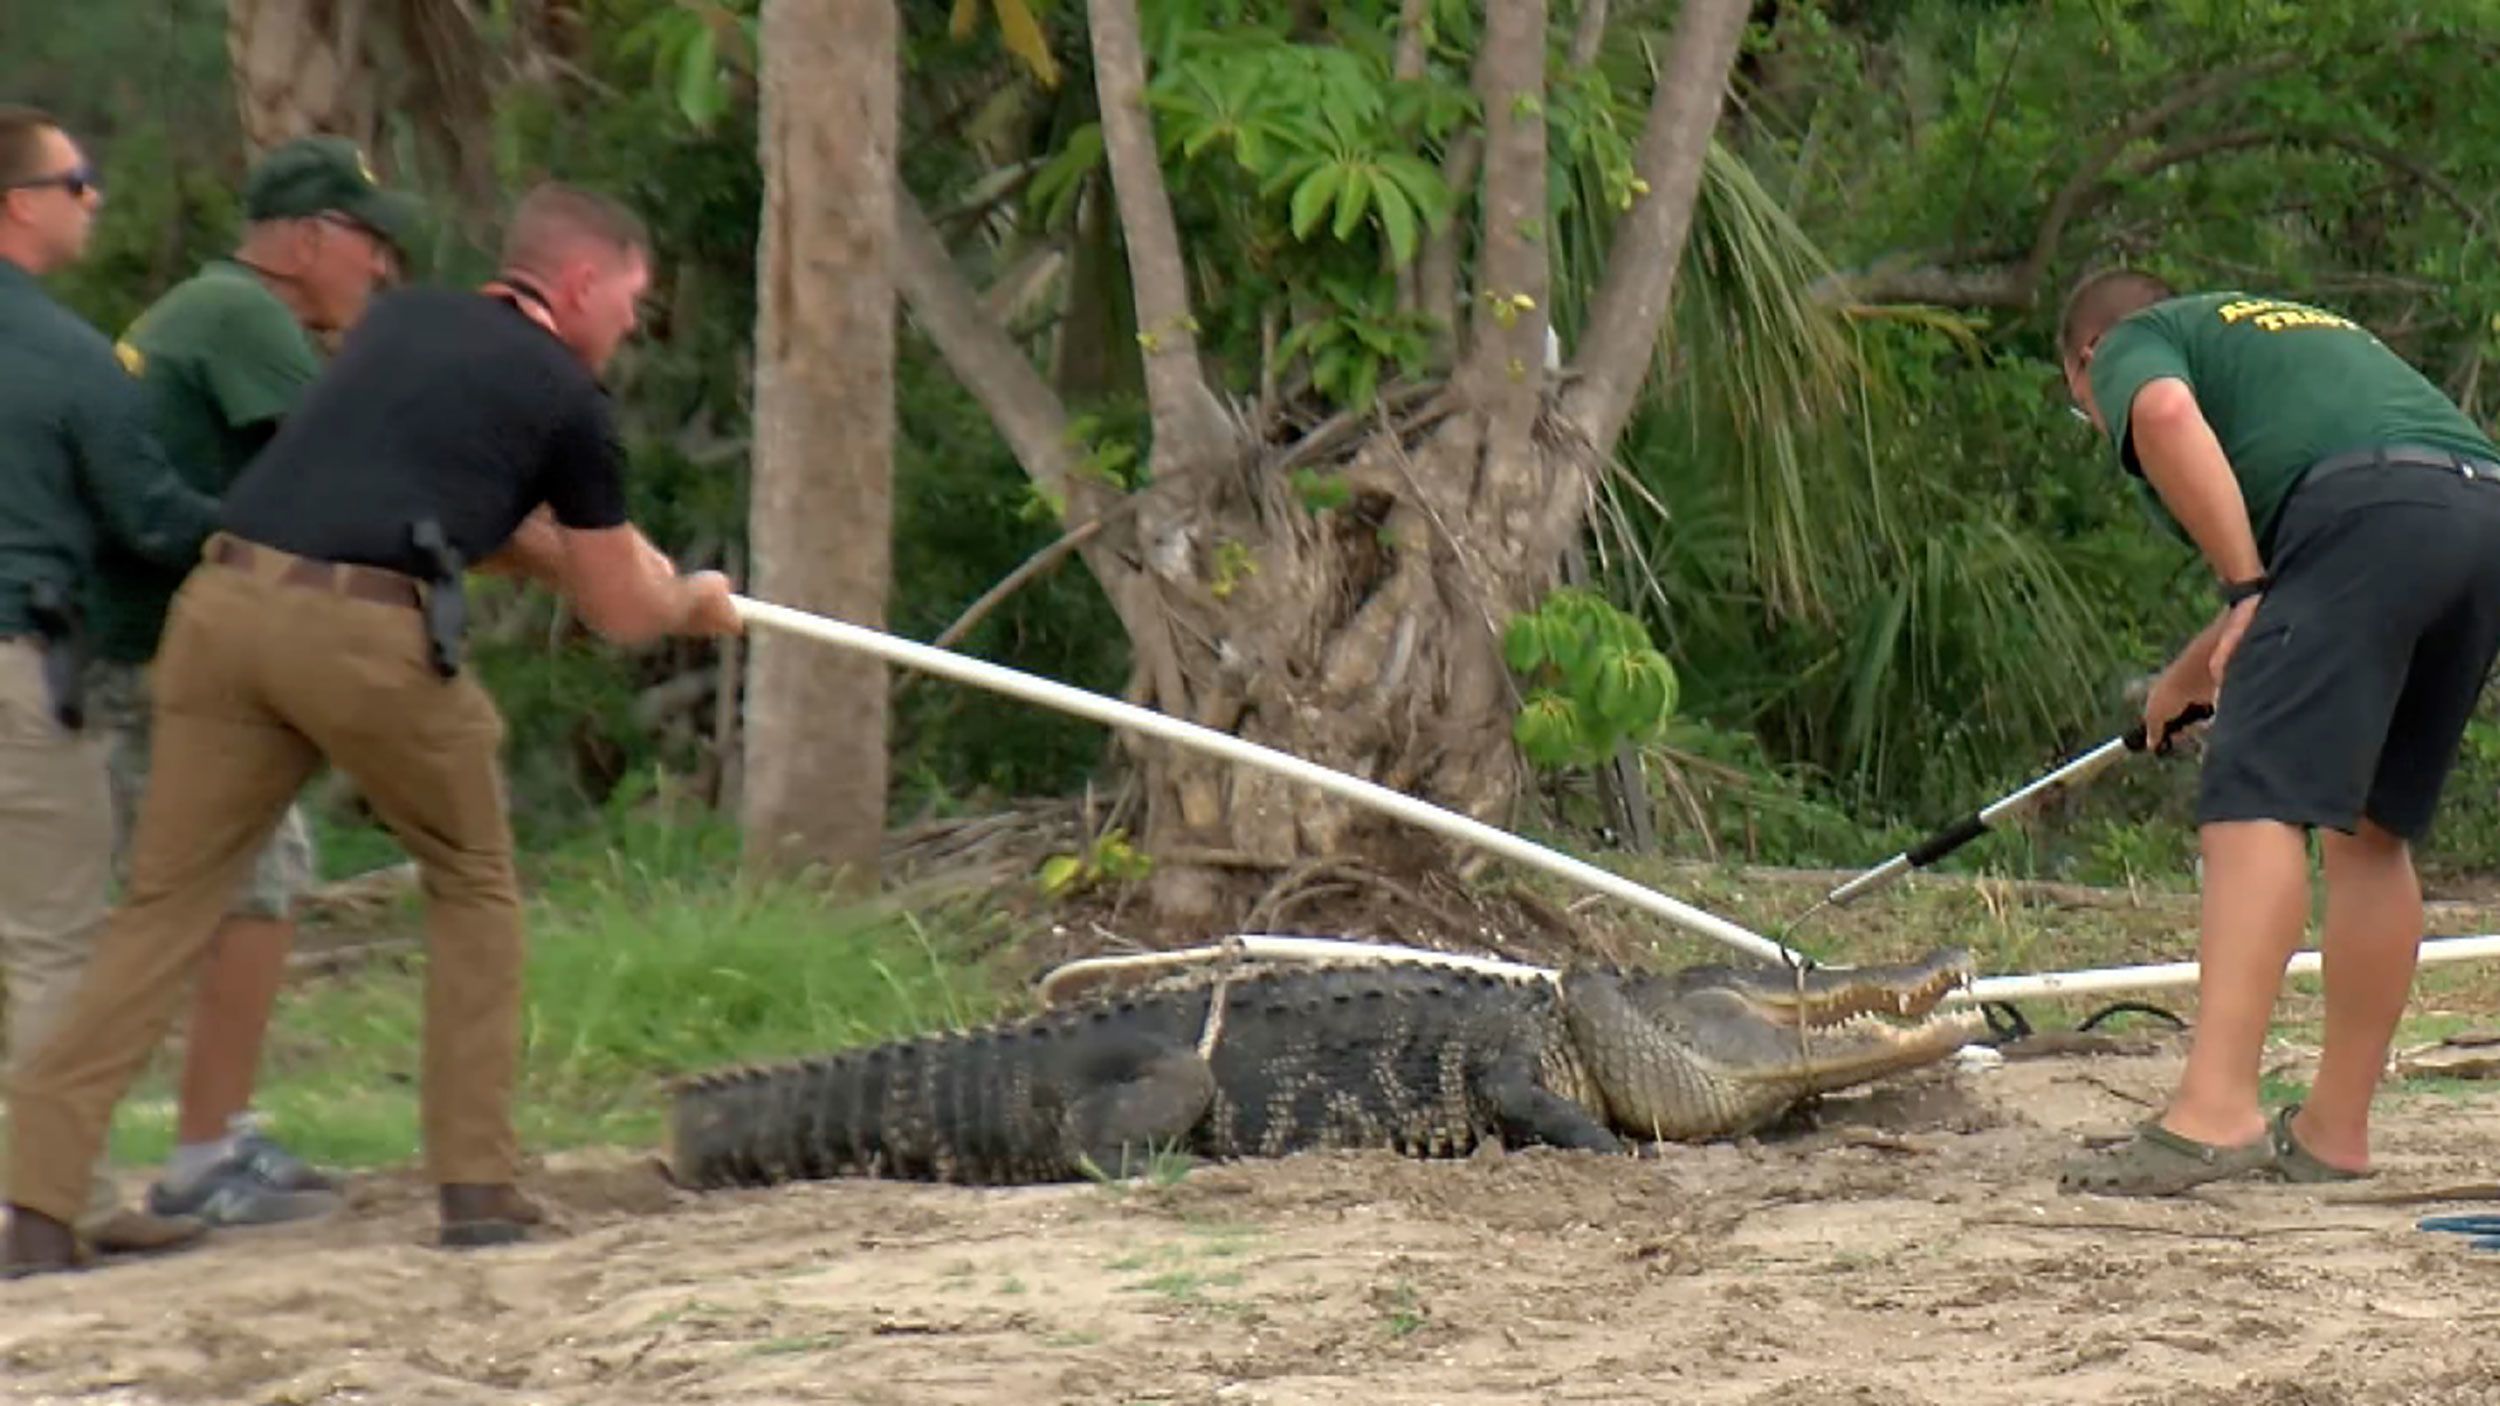 A team works to capture an alligator they believe attacked a man, causing him to lose his arm. Phot...